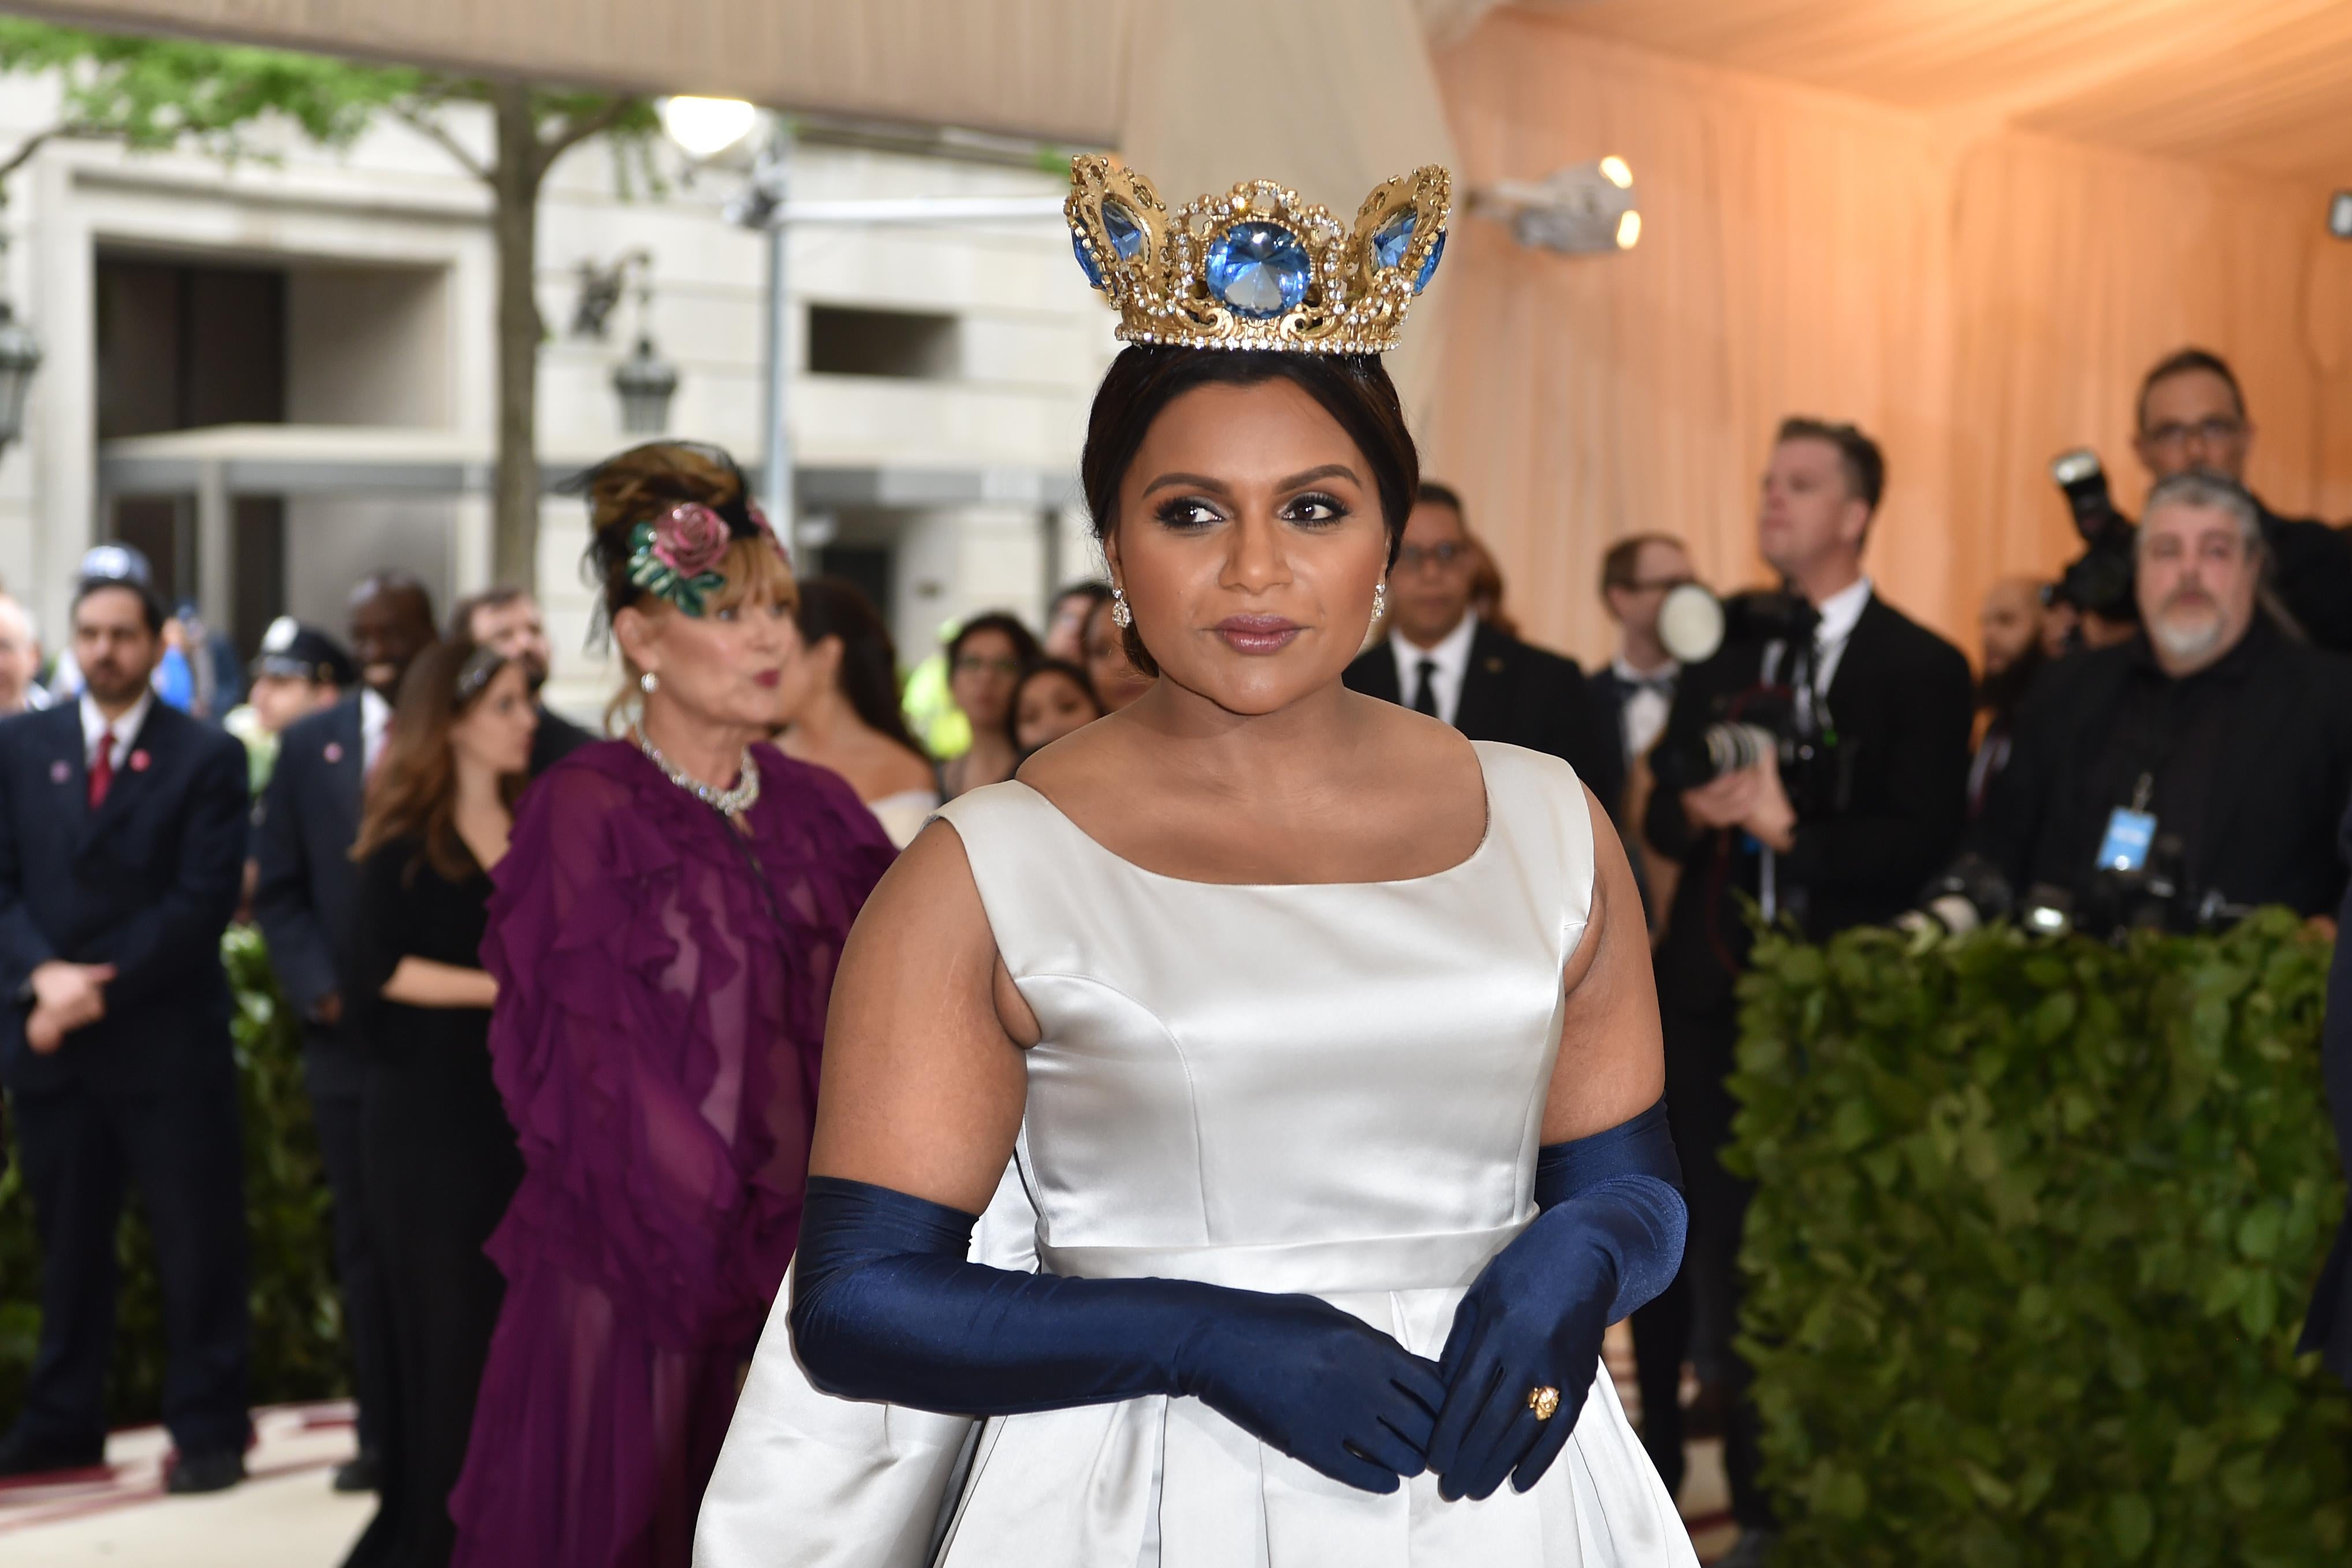 Actress Mindy Kaling arrives for the 2018 Met Gala on May 7, 2018, at the Metropolitan Museum of Art in New York. - The Gala raises money for the Metropolitan Museum of Arts Costume Institute. The Gala's 2018 theme is Heavenly Bodies: Fashion and the Catholic Imagination. (Photo by Hector RETAMAL / AFP)        (Photo credit should read HECTOR RETAMAL/AFP/Getty Images)